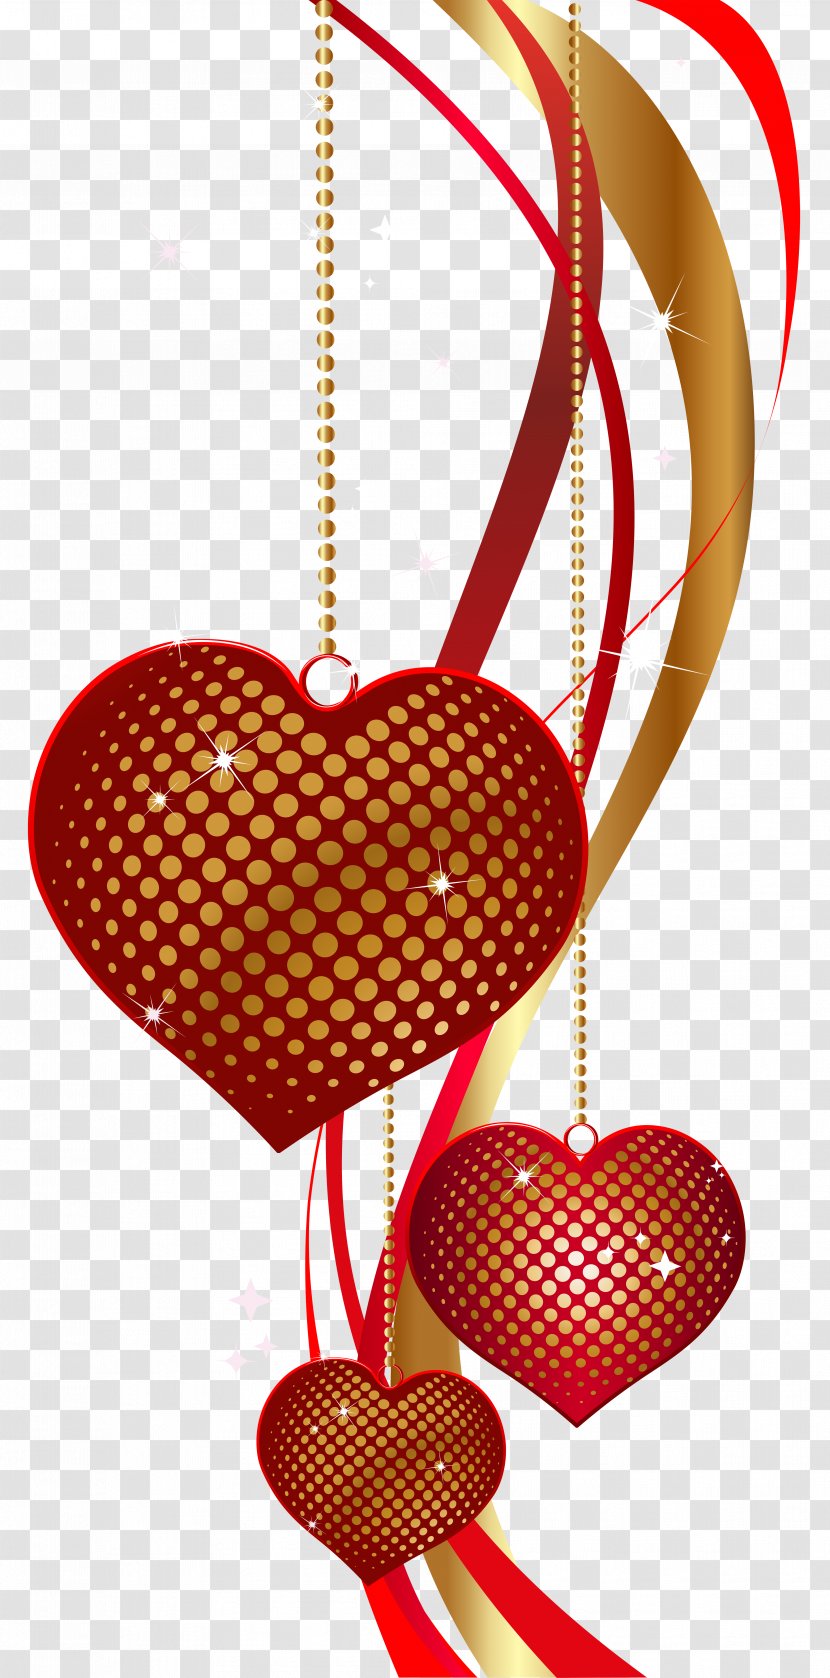 Heart Clip Art - Tree - Valentine's Day Decorative Hearts PNG Image Transparent PNG